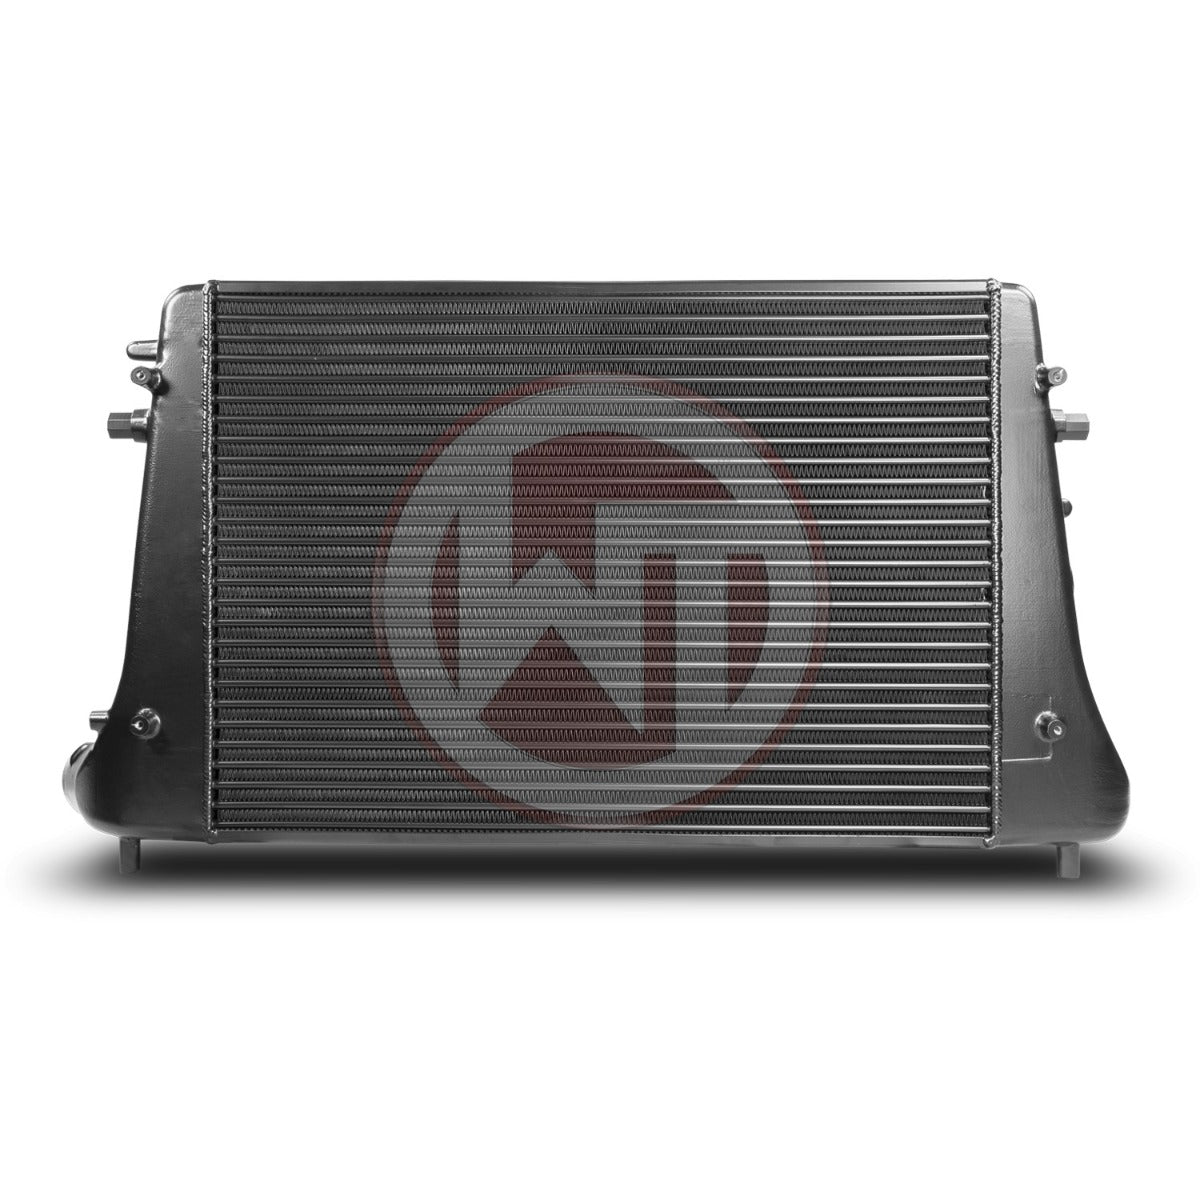 Wagner Tuning Audi A3 1.6 2.0 TDI (8P) Gen 2 Competition Intercooler Kit